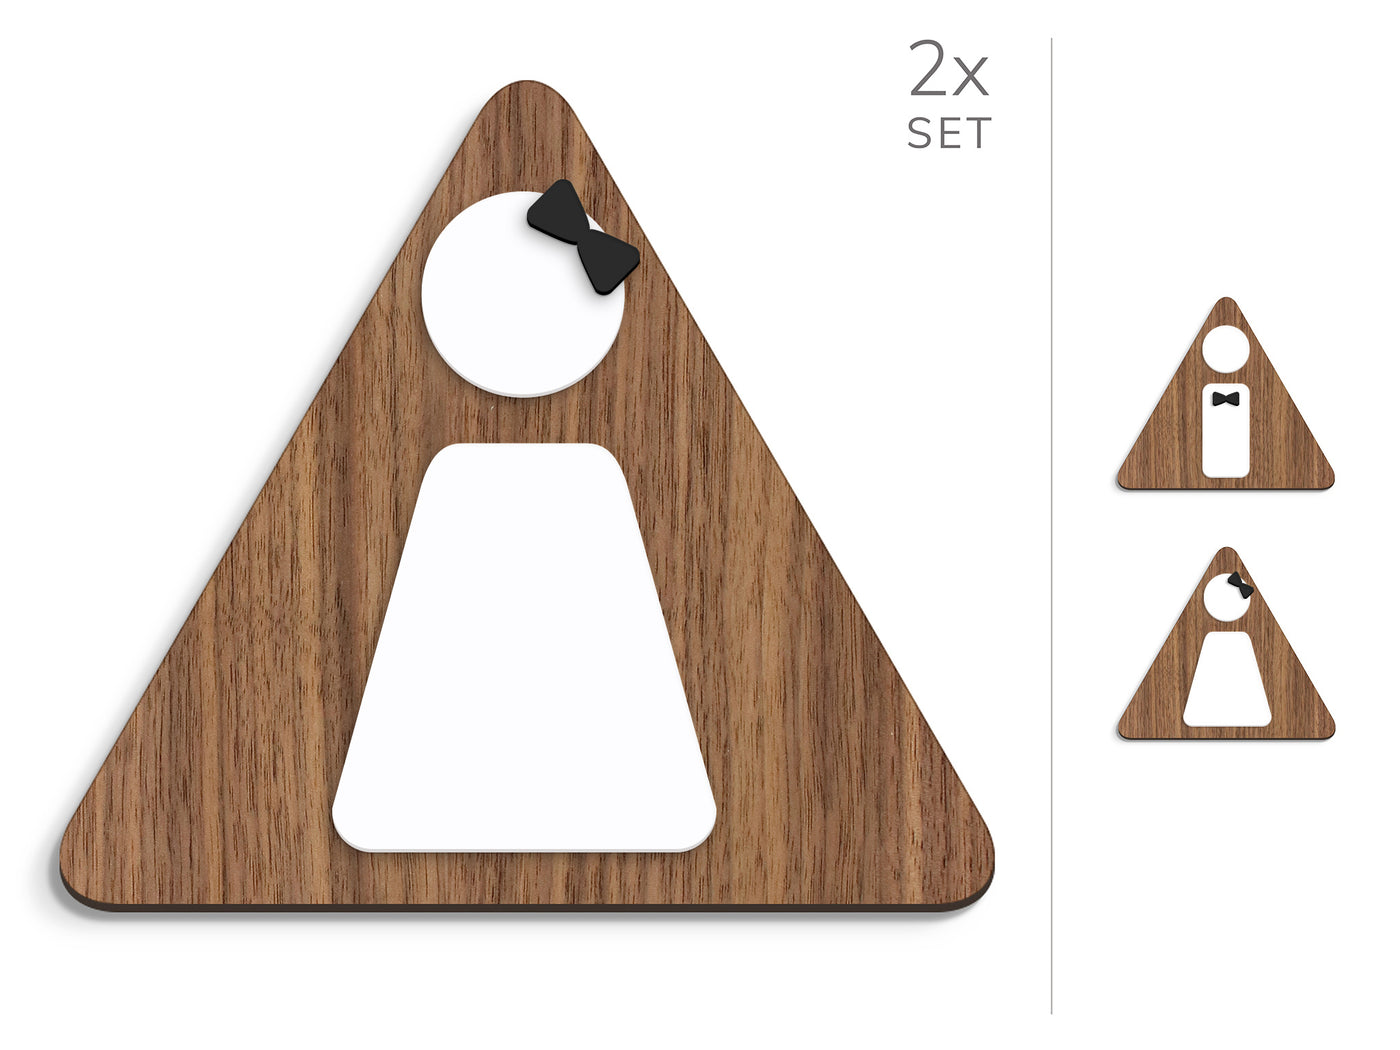 Styled knot, 2x Triangle Base - Restroom Signs Set - Man, Woman